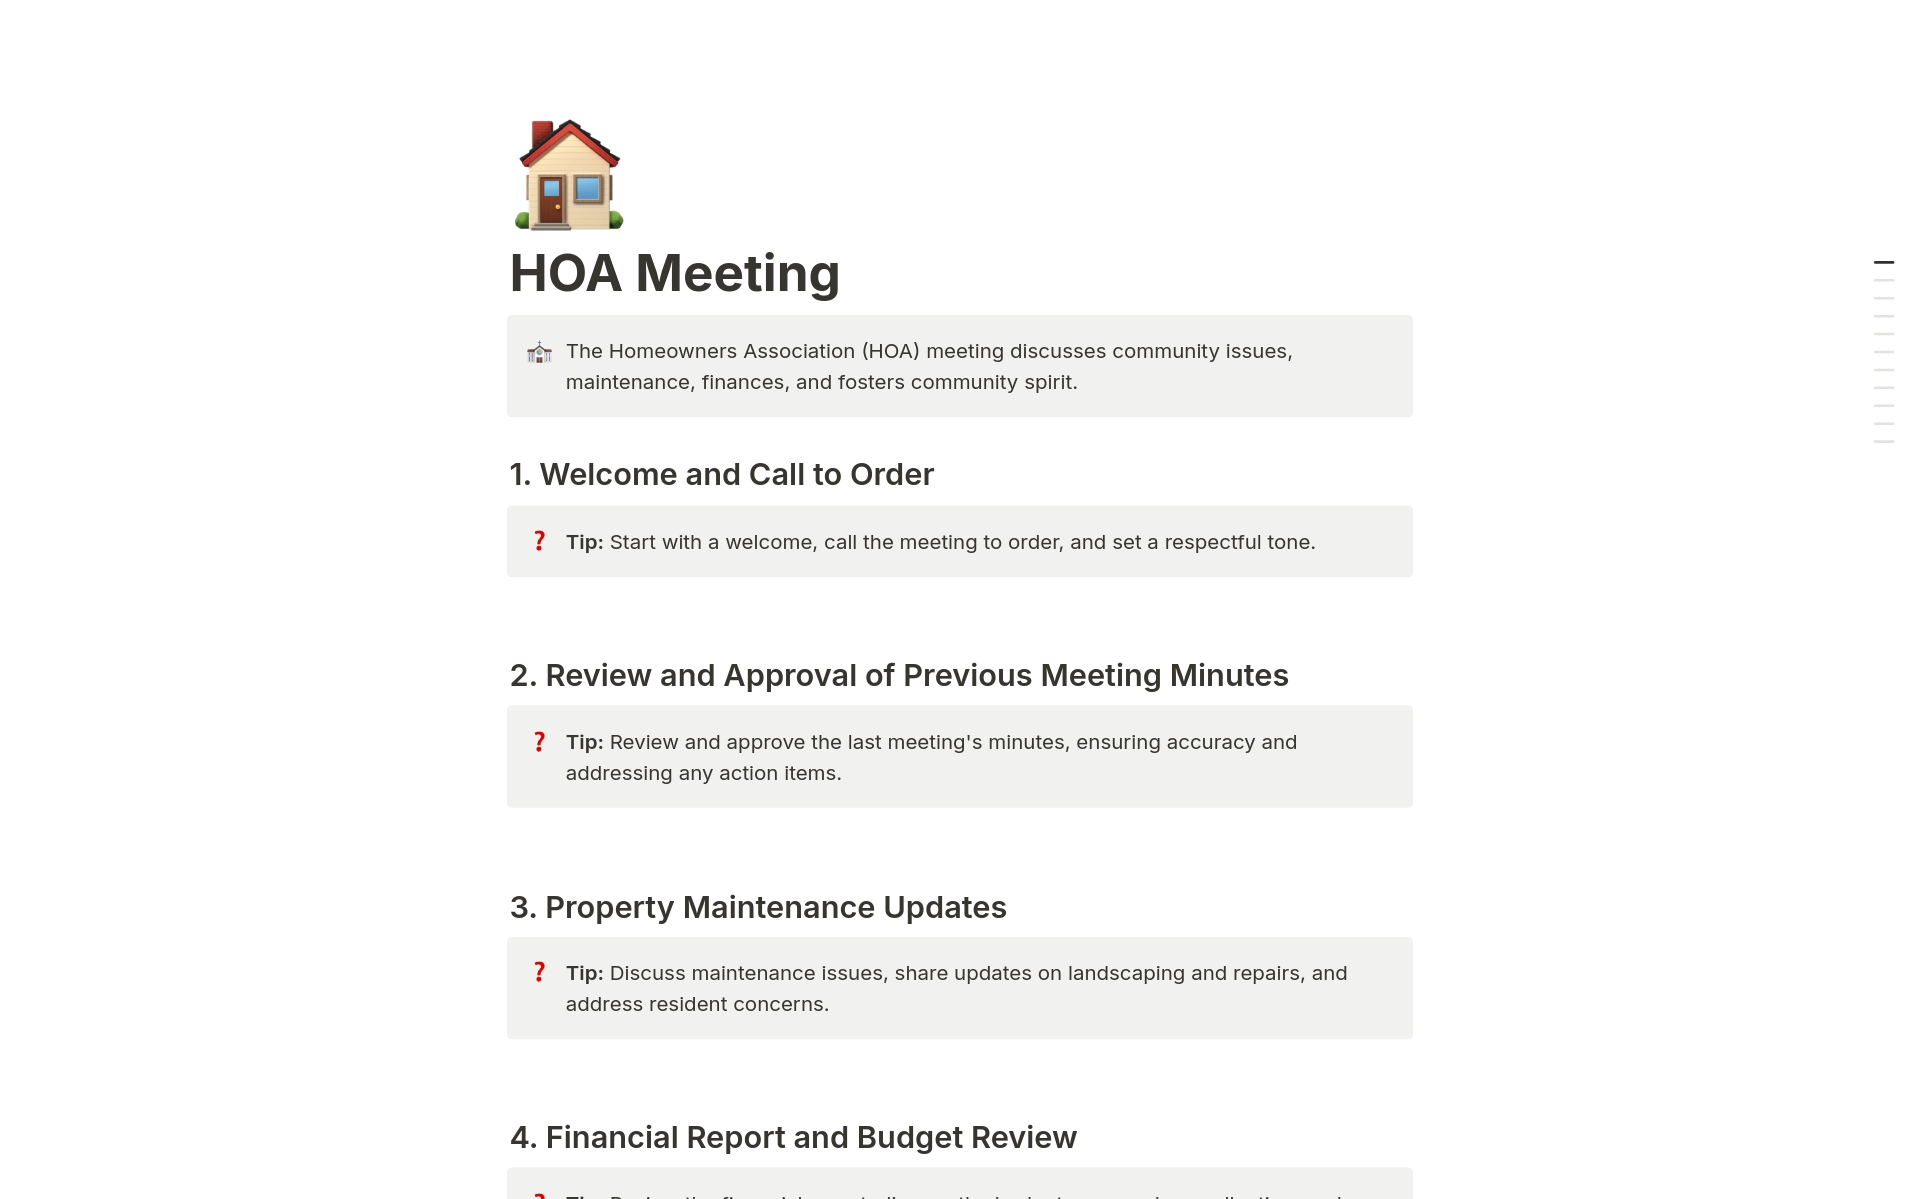 The Homeowners Association (HOA) meeting discusses community issues, maintenance, finances, and fosters community spirit.